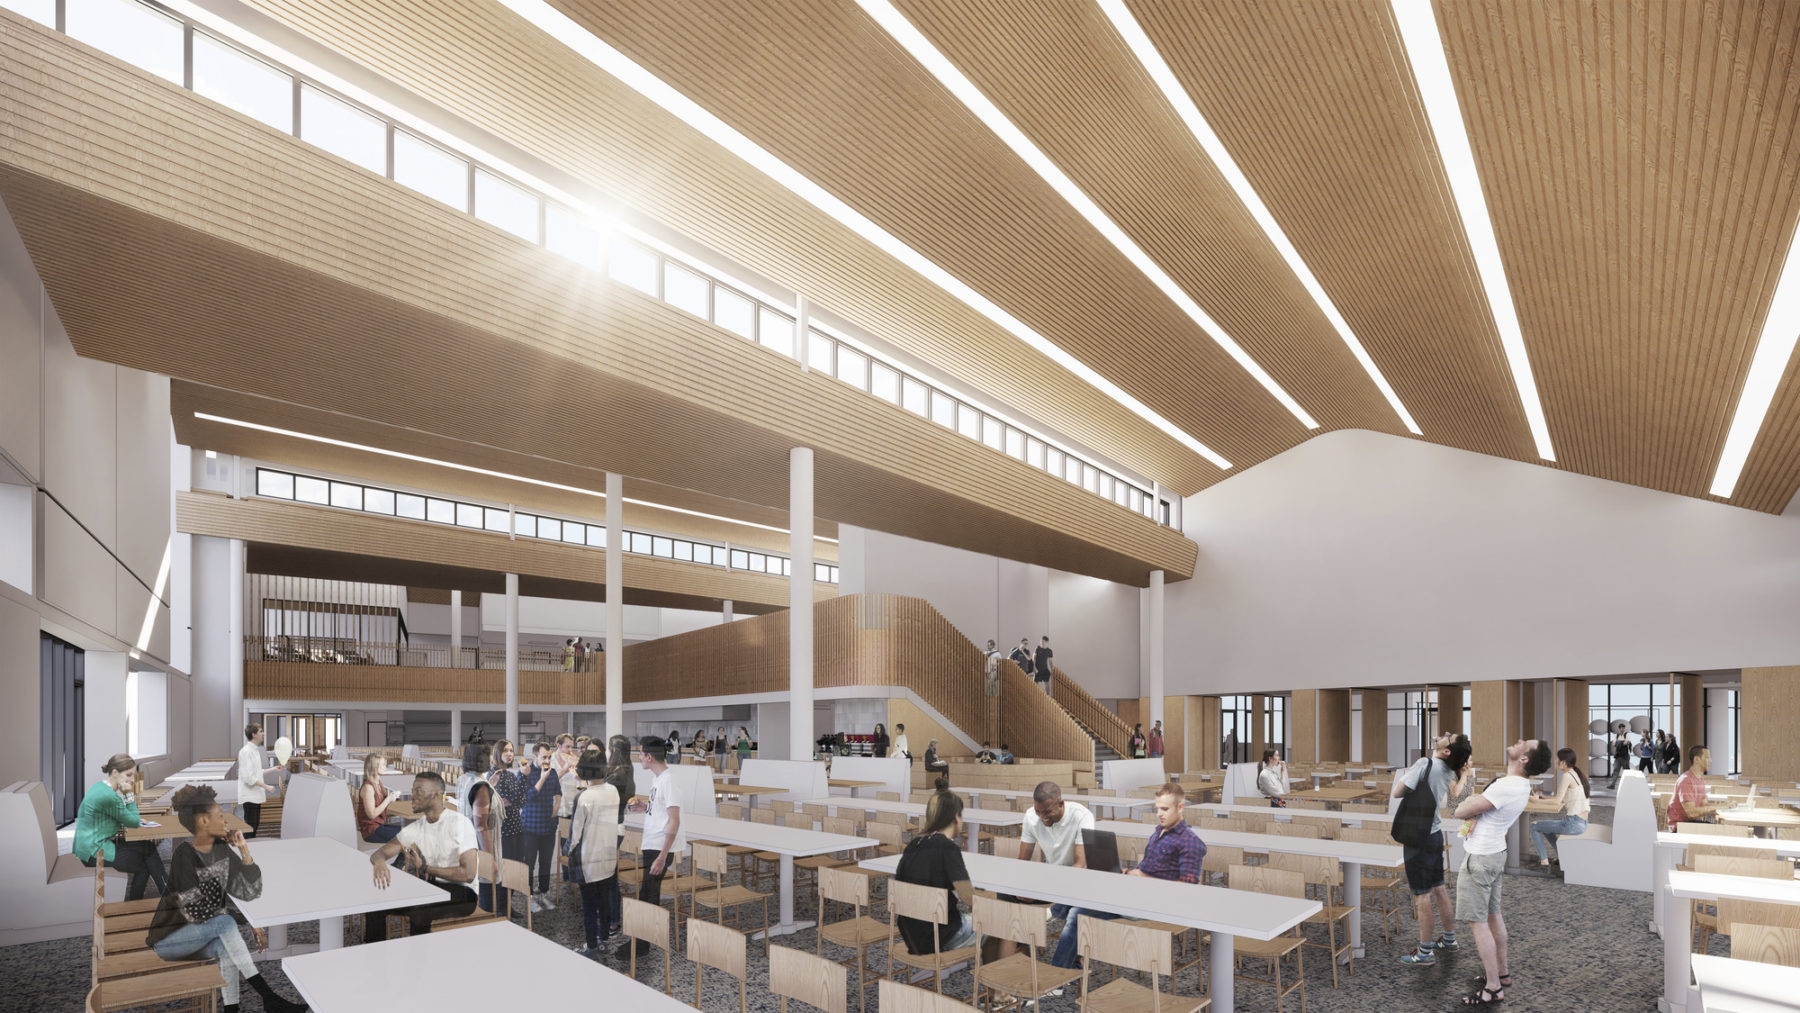 perspective rendering view of dining hall interior, wood ceiling with light streaming in